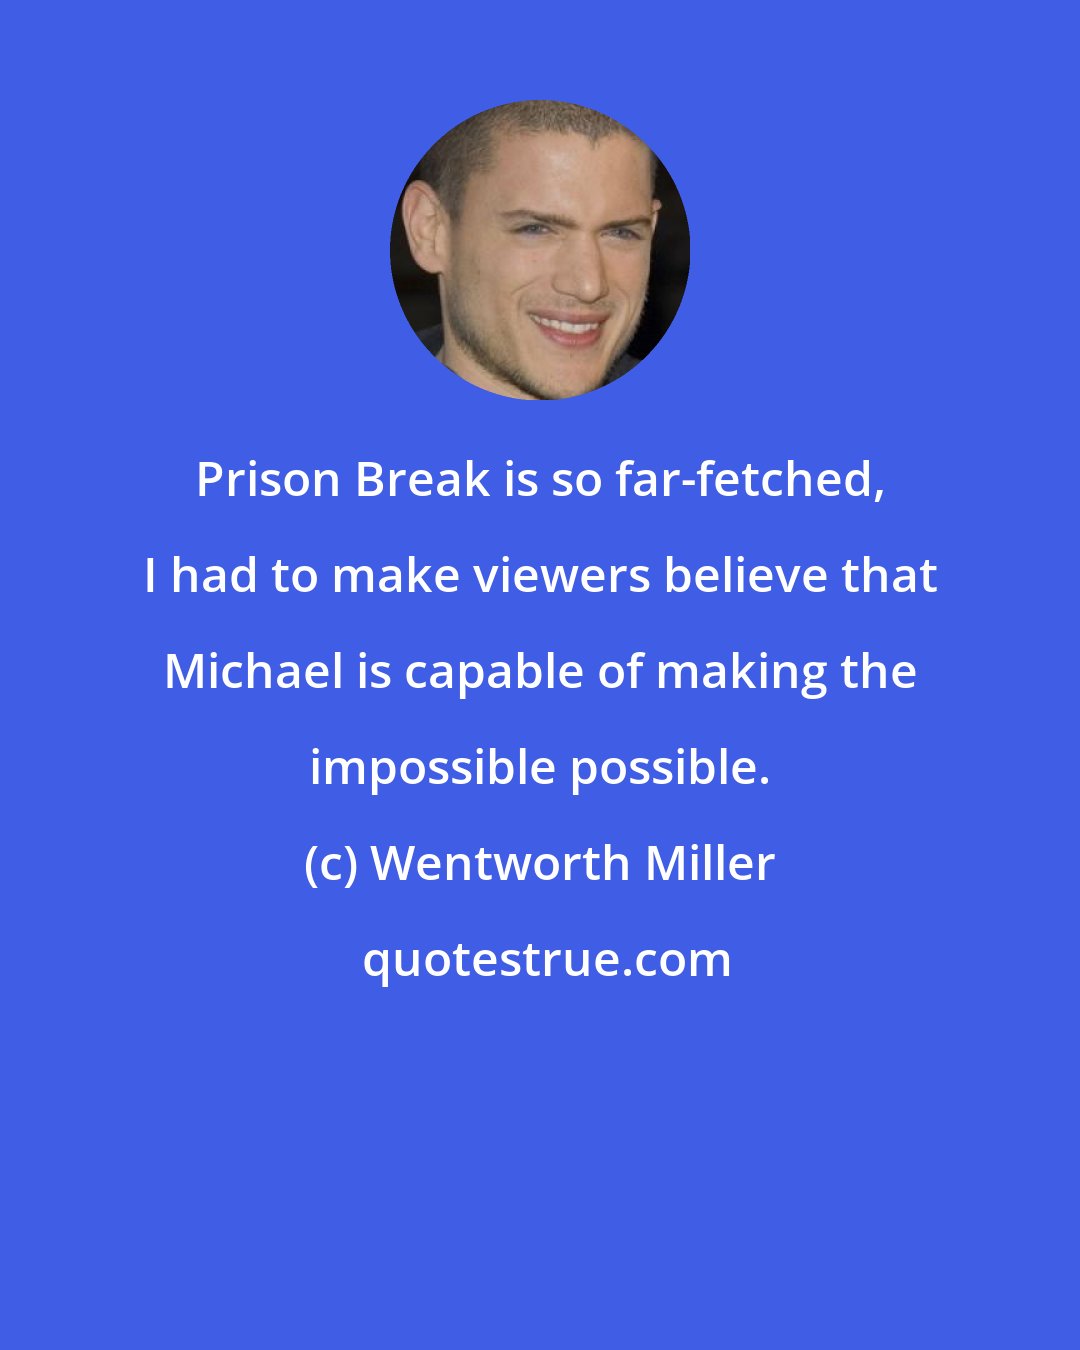 Wentworth Miller: Prison Break is so far-fetched, I had to make viewers believe that Michael is capable of making the impossible possible.